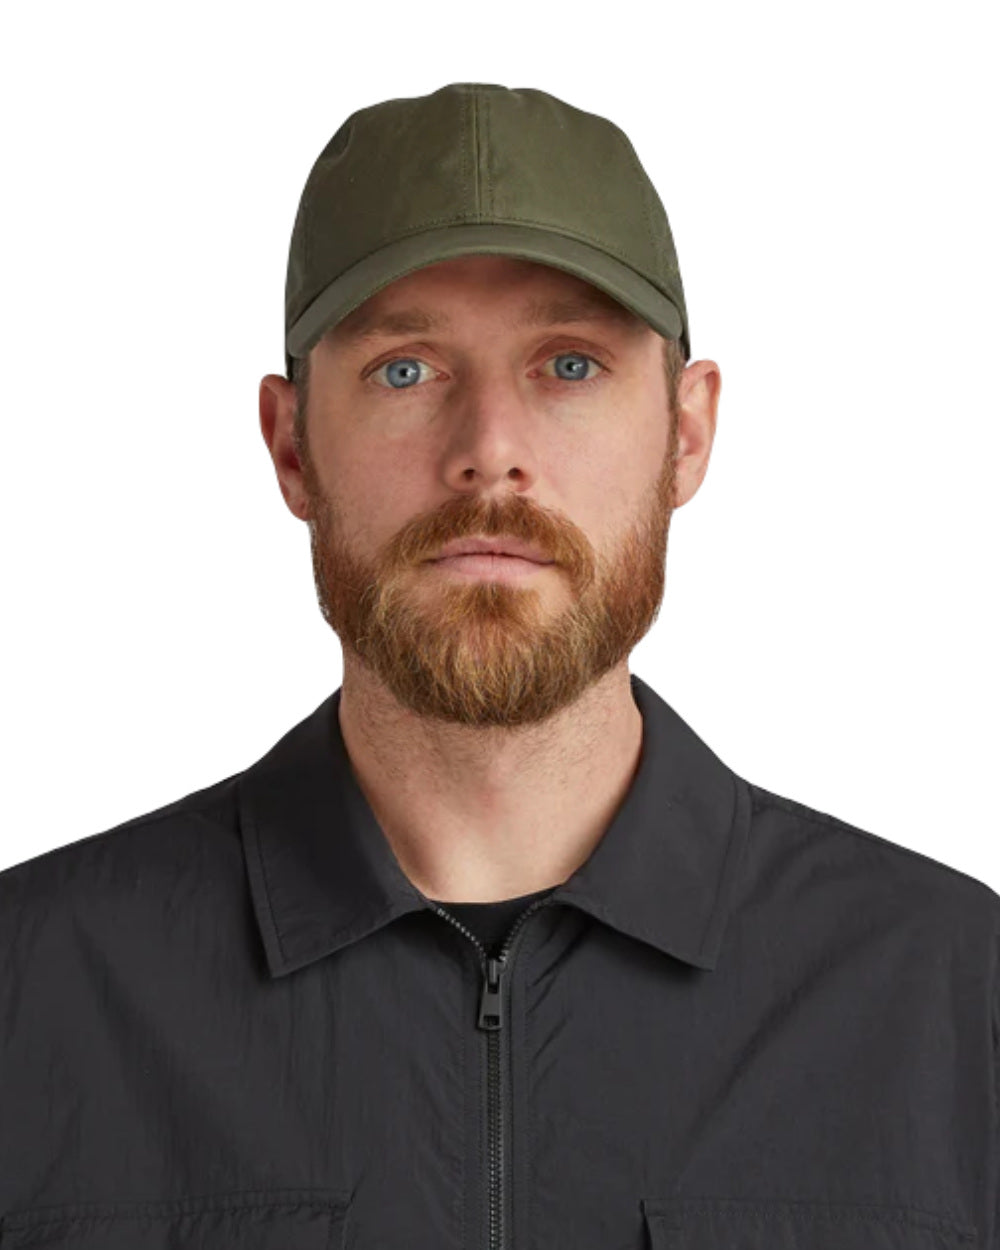 Green Coloured Tilley Hats Waxed Baseball Cap On A White Background 